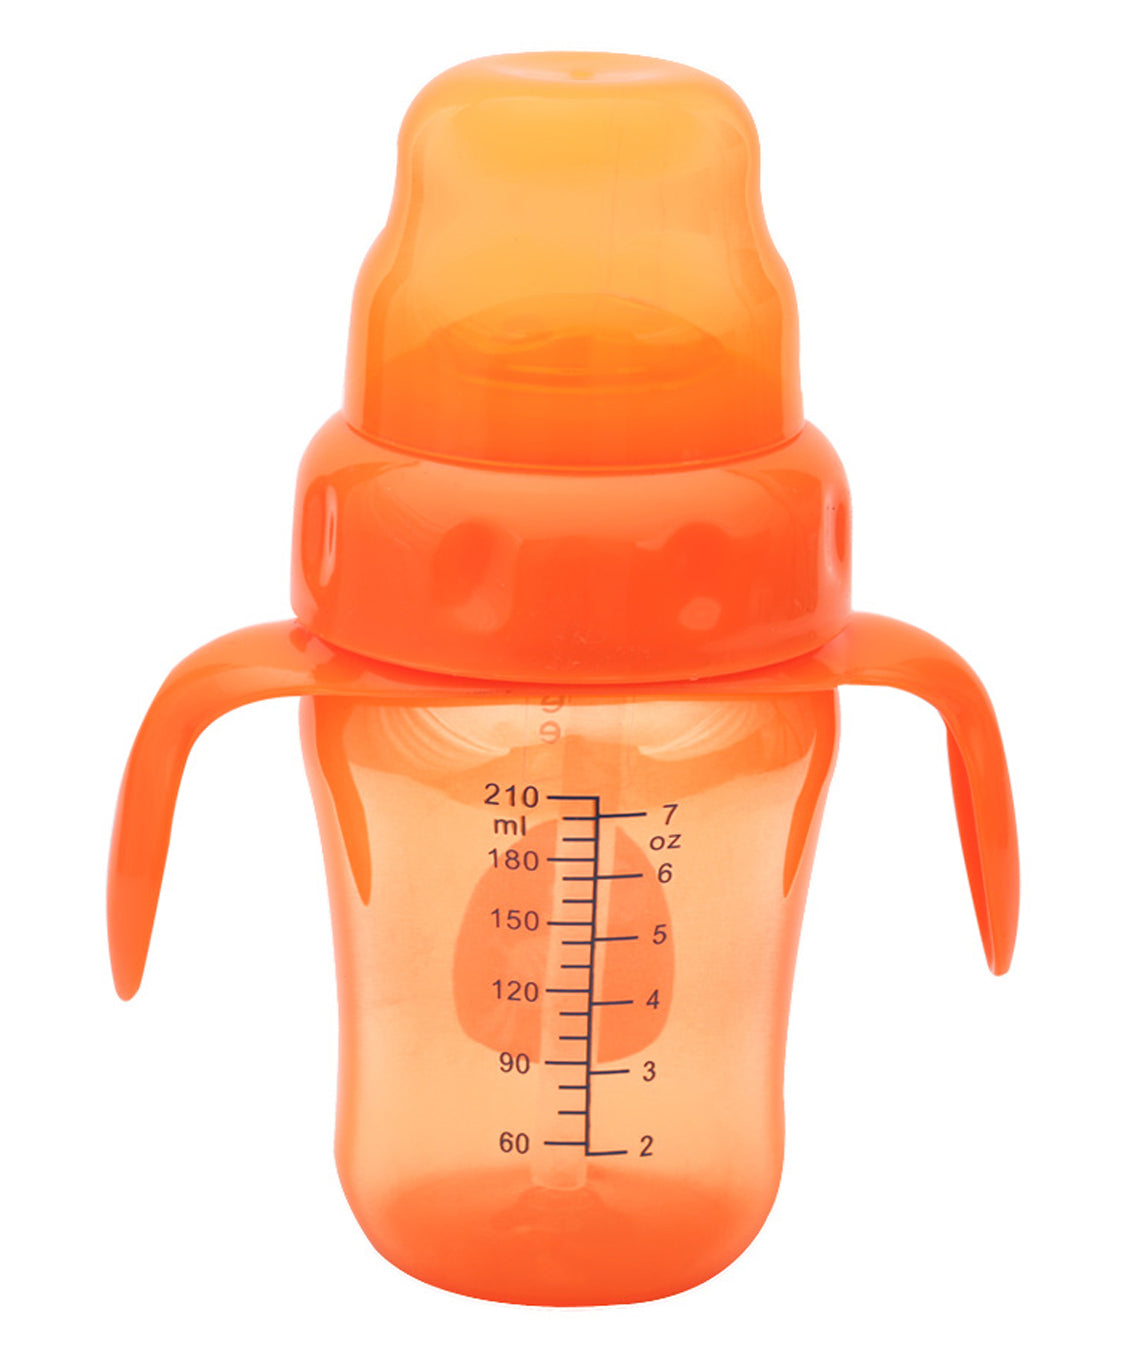 Mee Mee 2 in 1 Spout & straw Sipper Cup 210ml 3m+ Orange